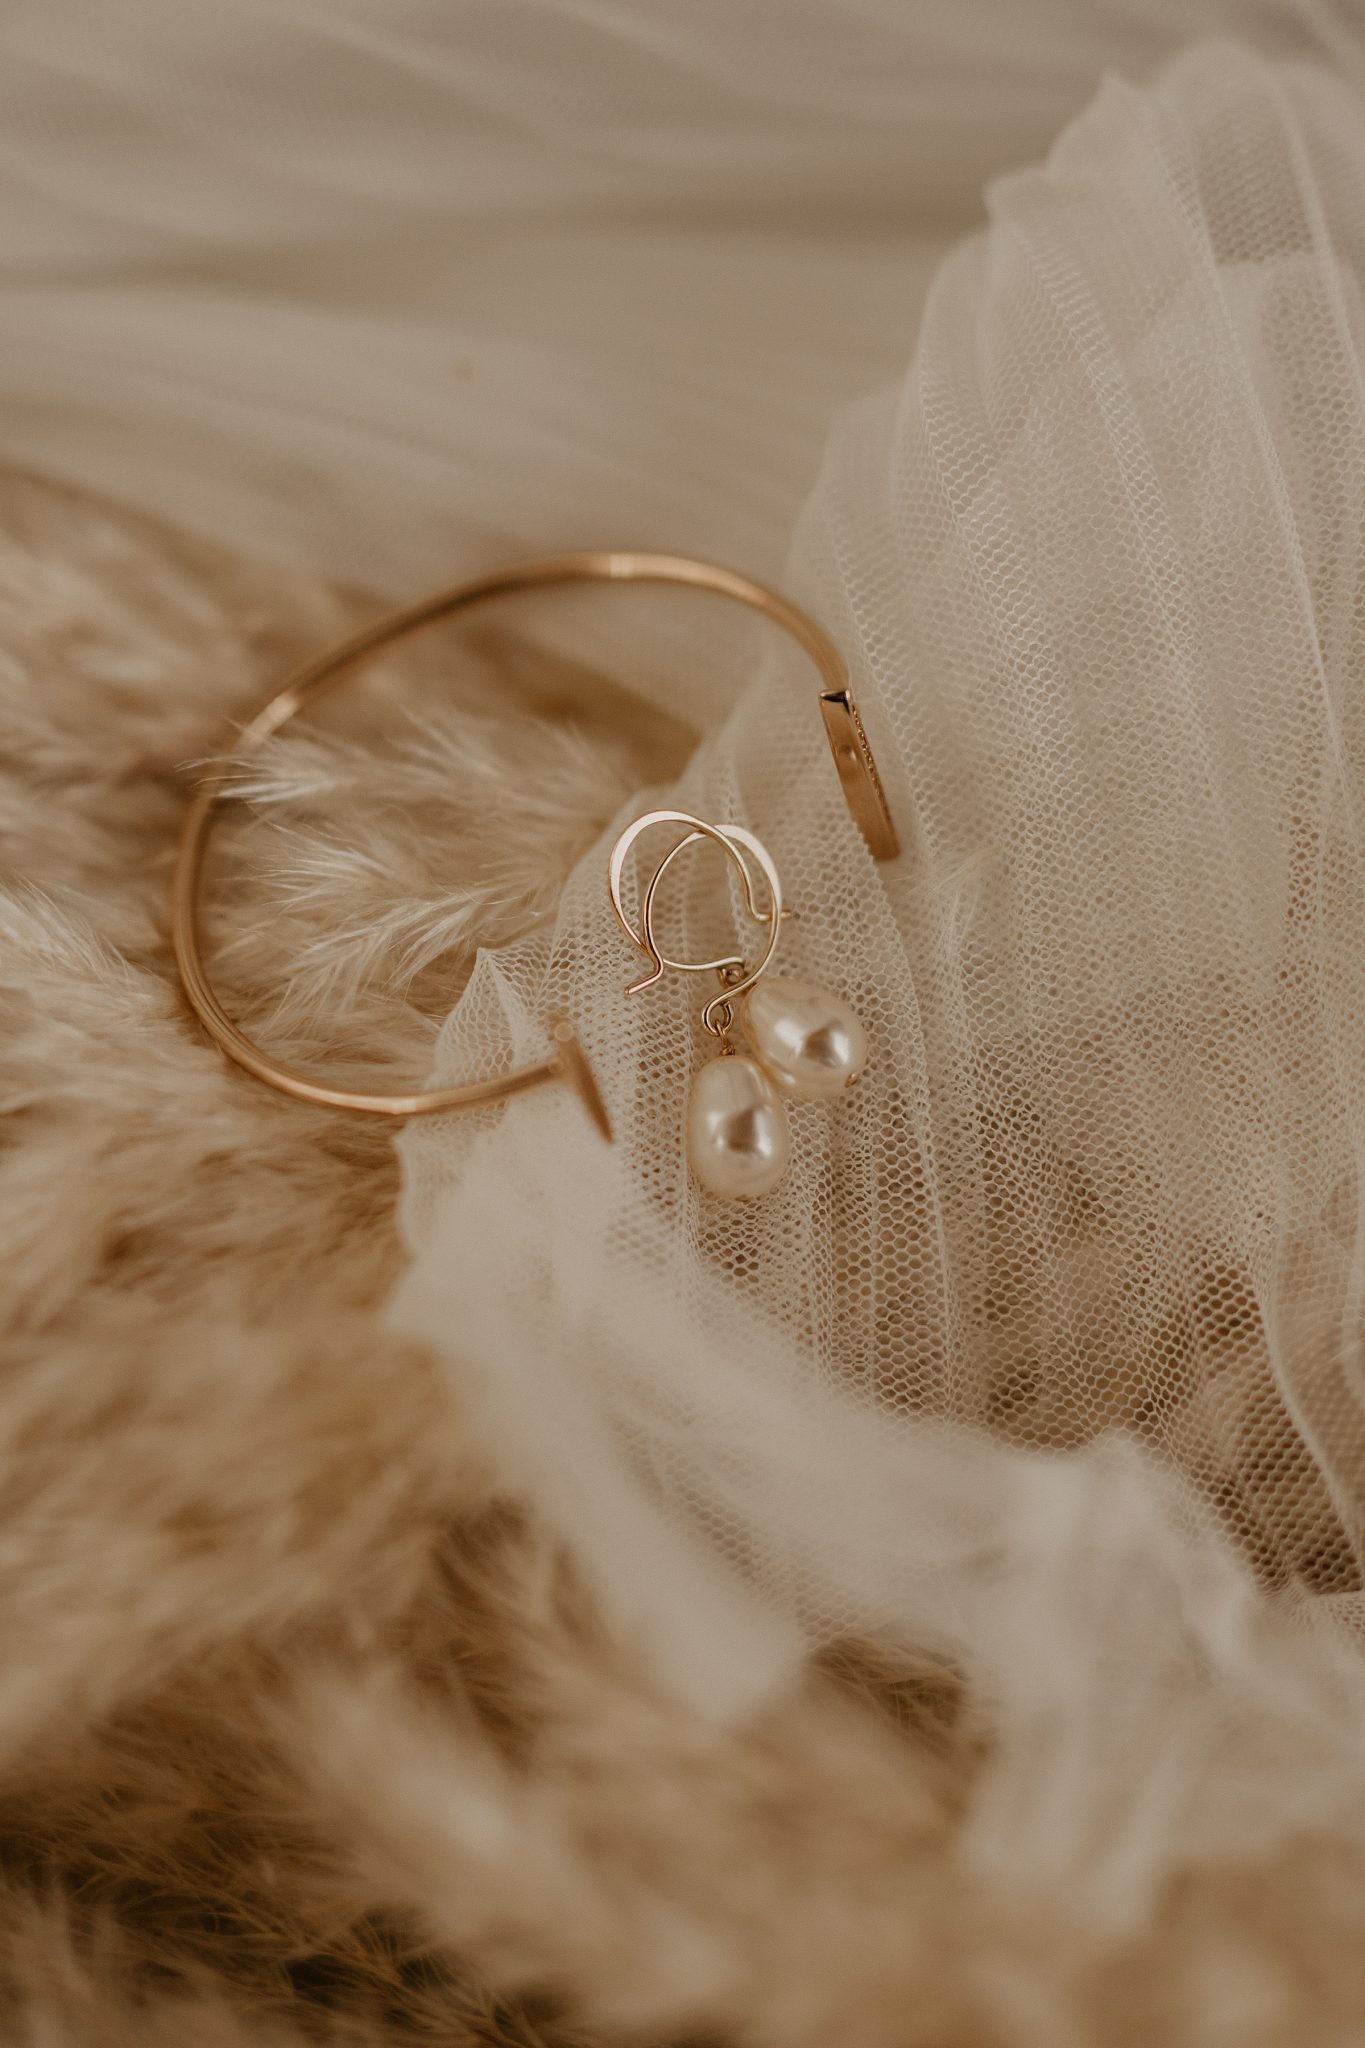 Bridal Minimalism Feature on Bronte Bride: Delica Bridal Shares All About New Bridal Trends & Dress Shopping During Covid, bridal accessories, jewelry